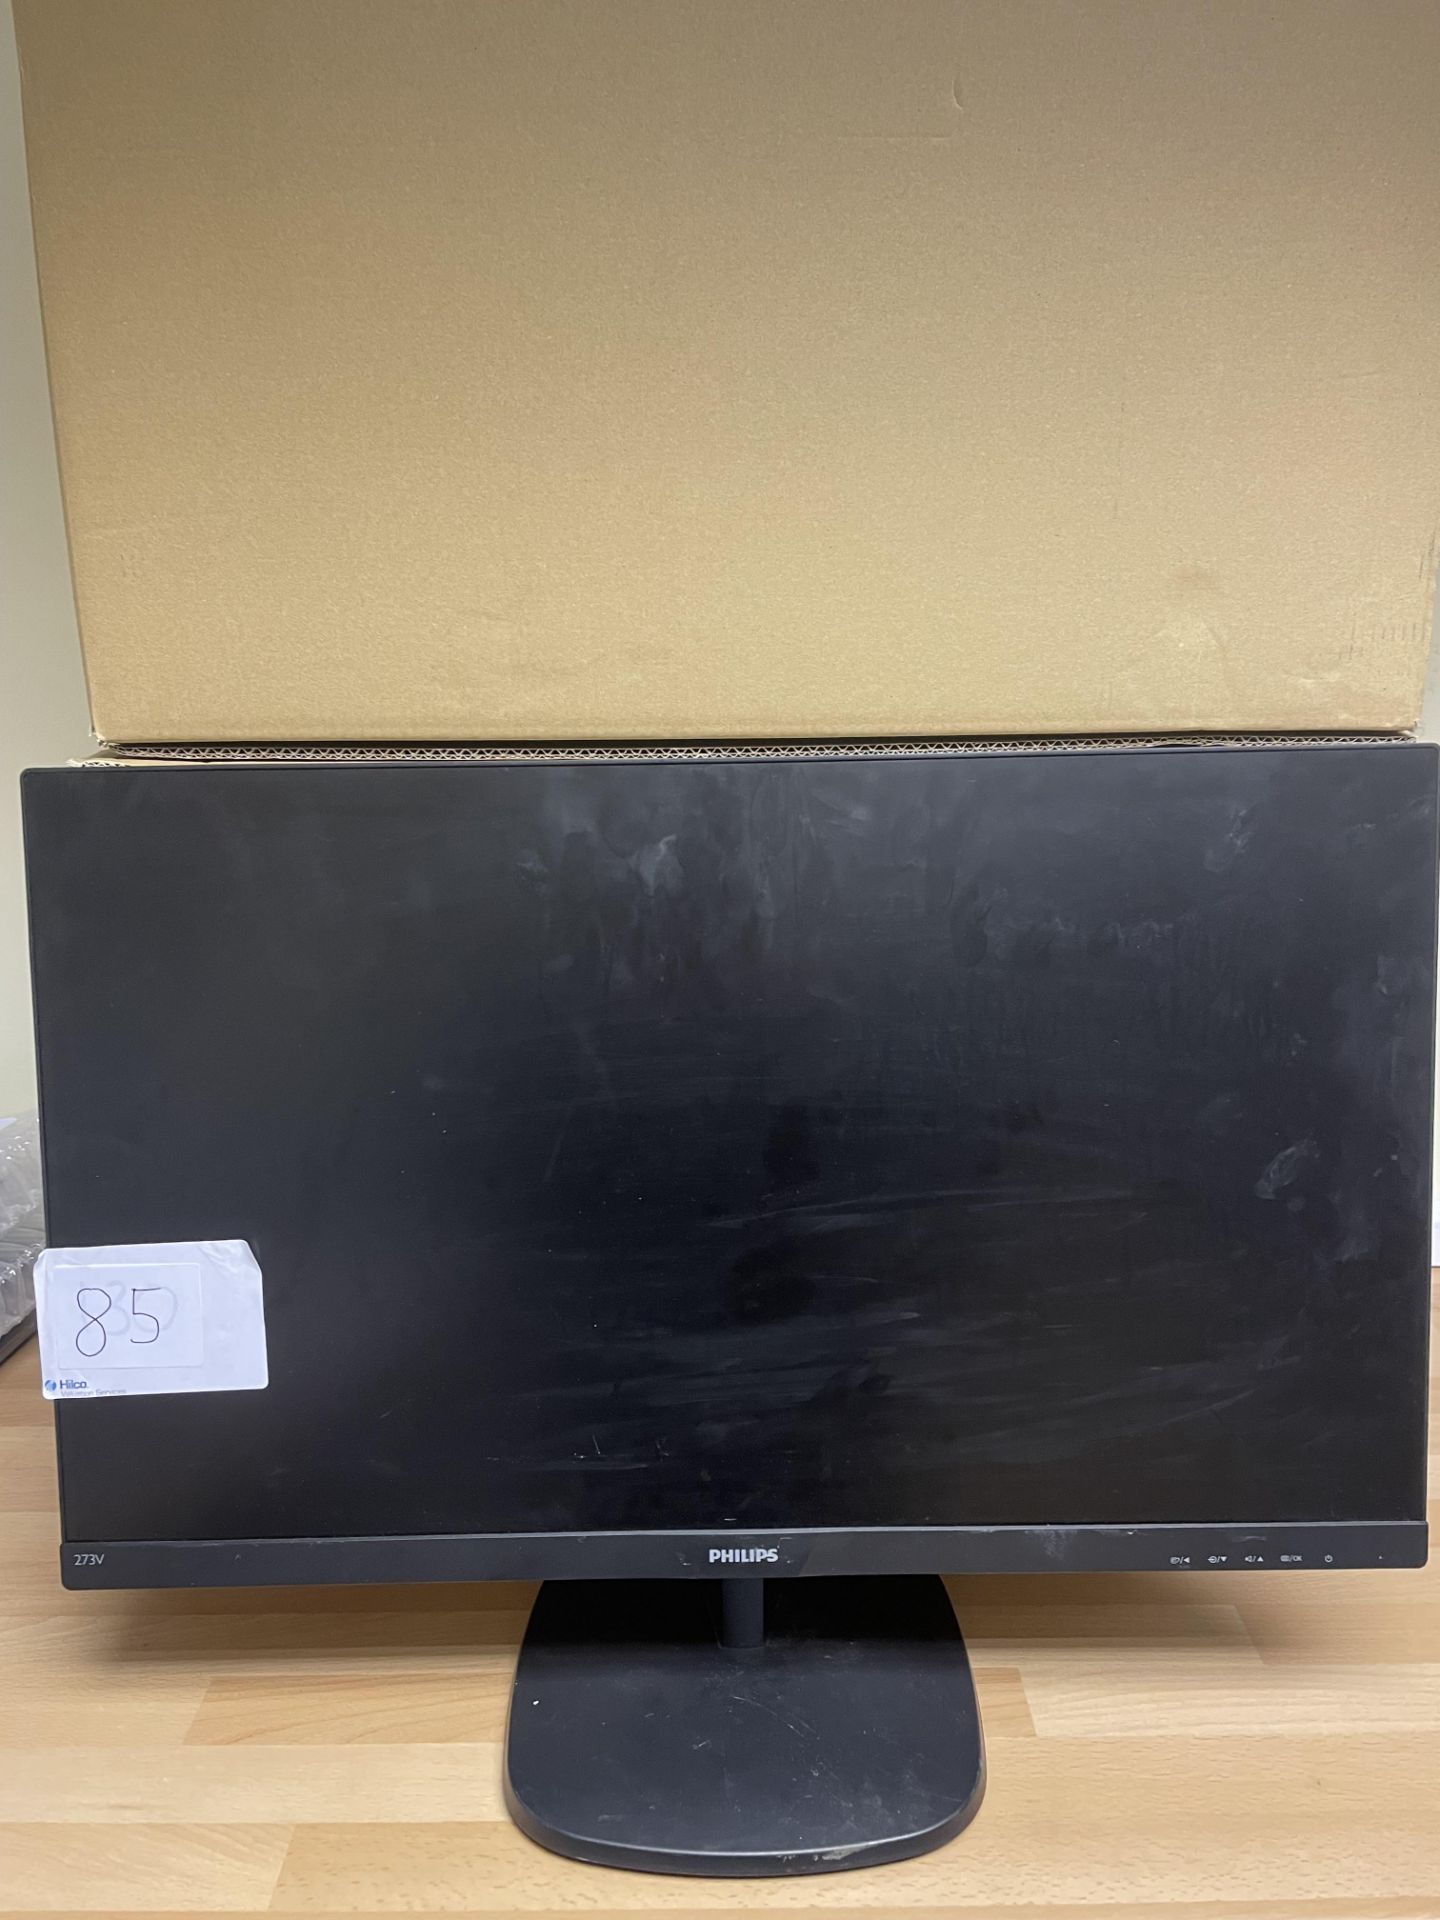 Philips, 273V7Q Monitor, No box or plugs, comes with stand, slight cosmetic wear, Serial Number UHB